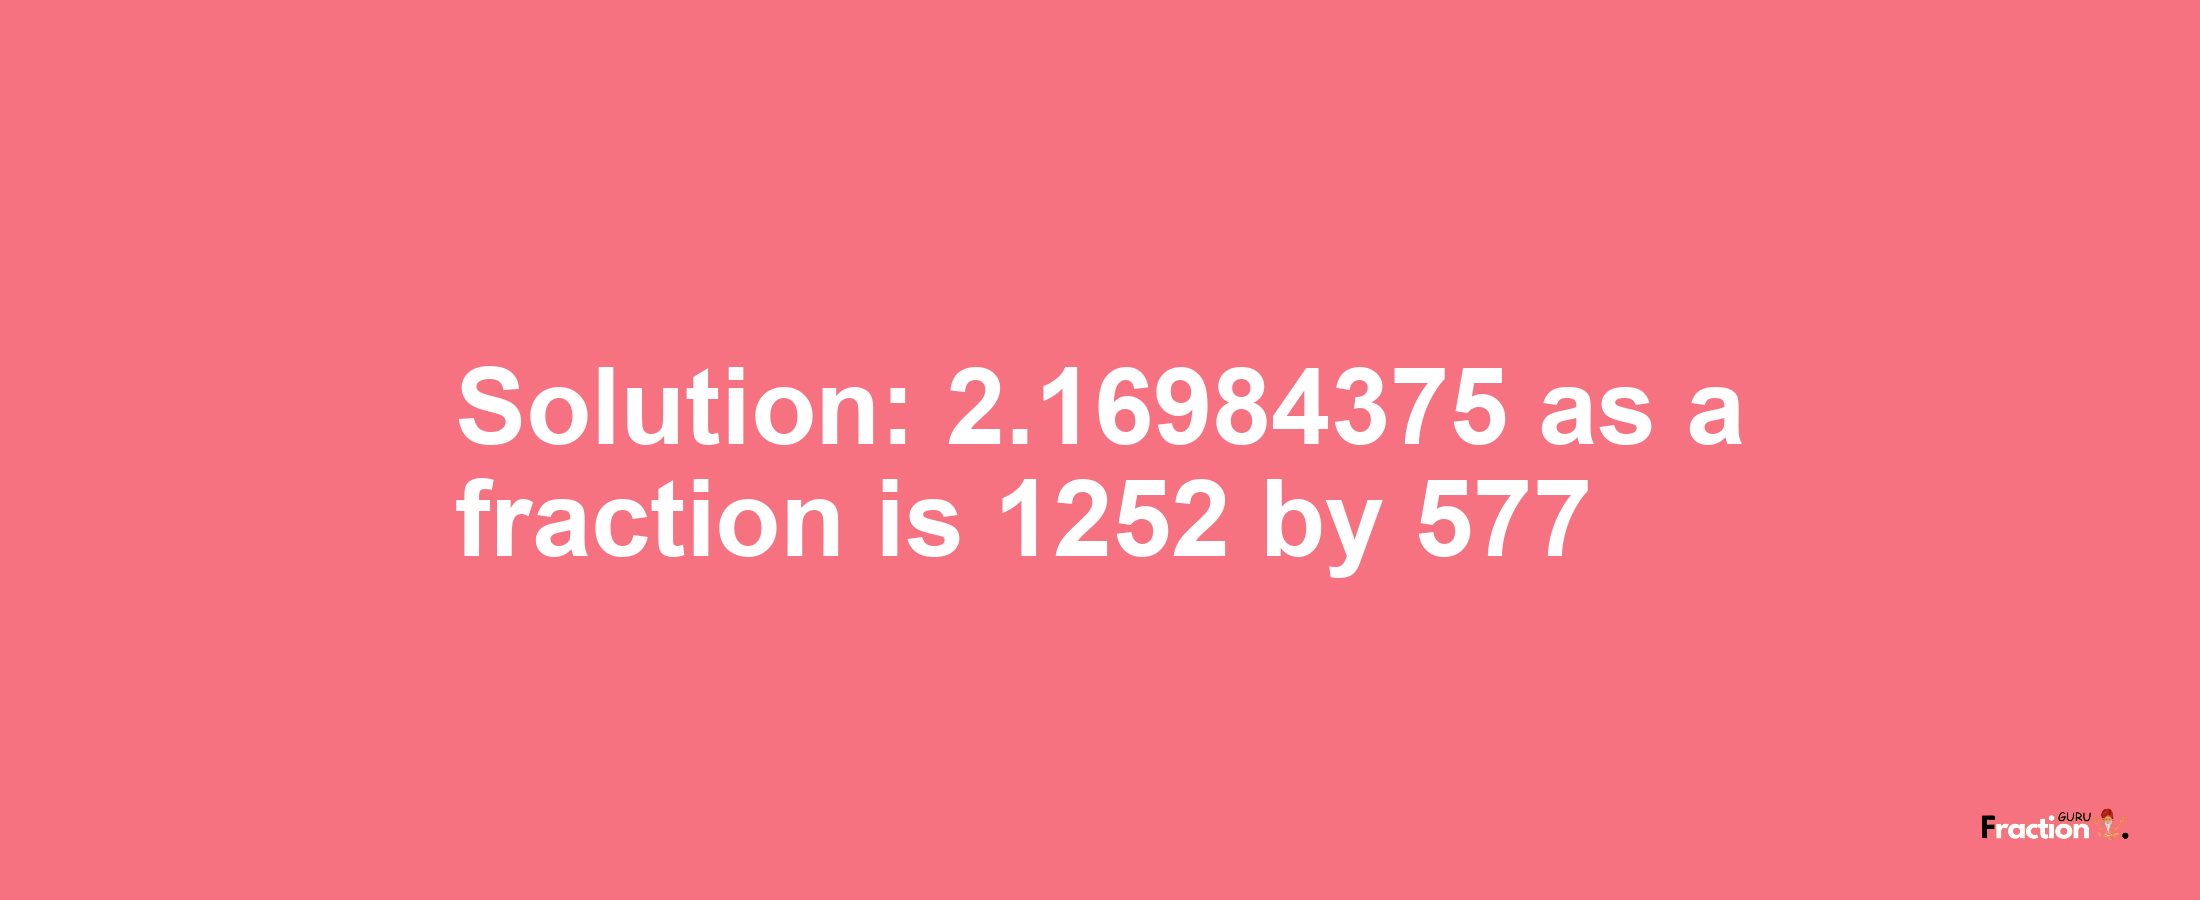 Solution:2.16984375 as a fraction is 1252/577